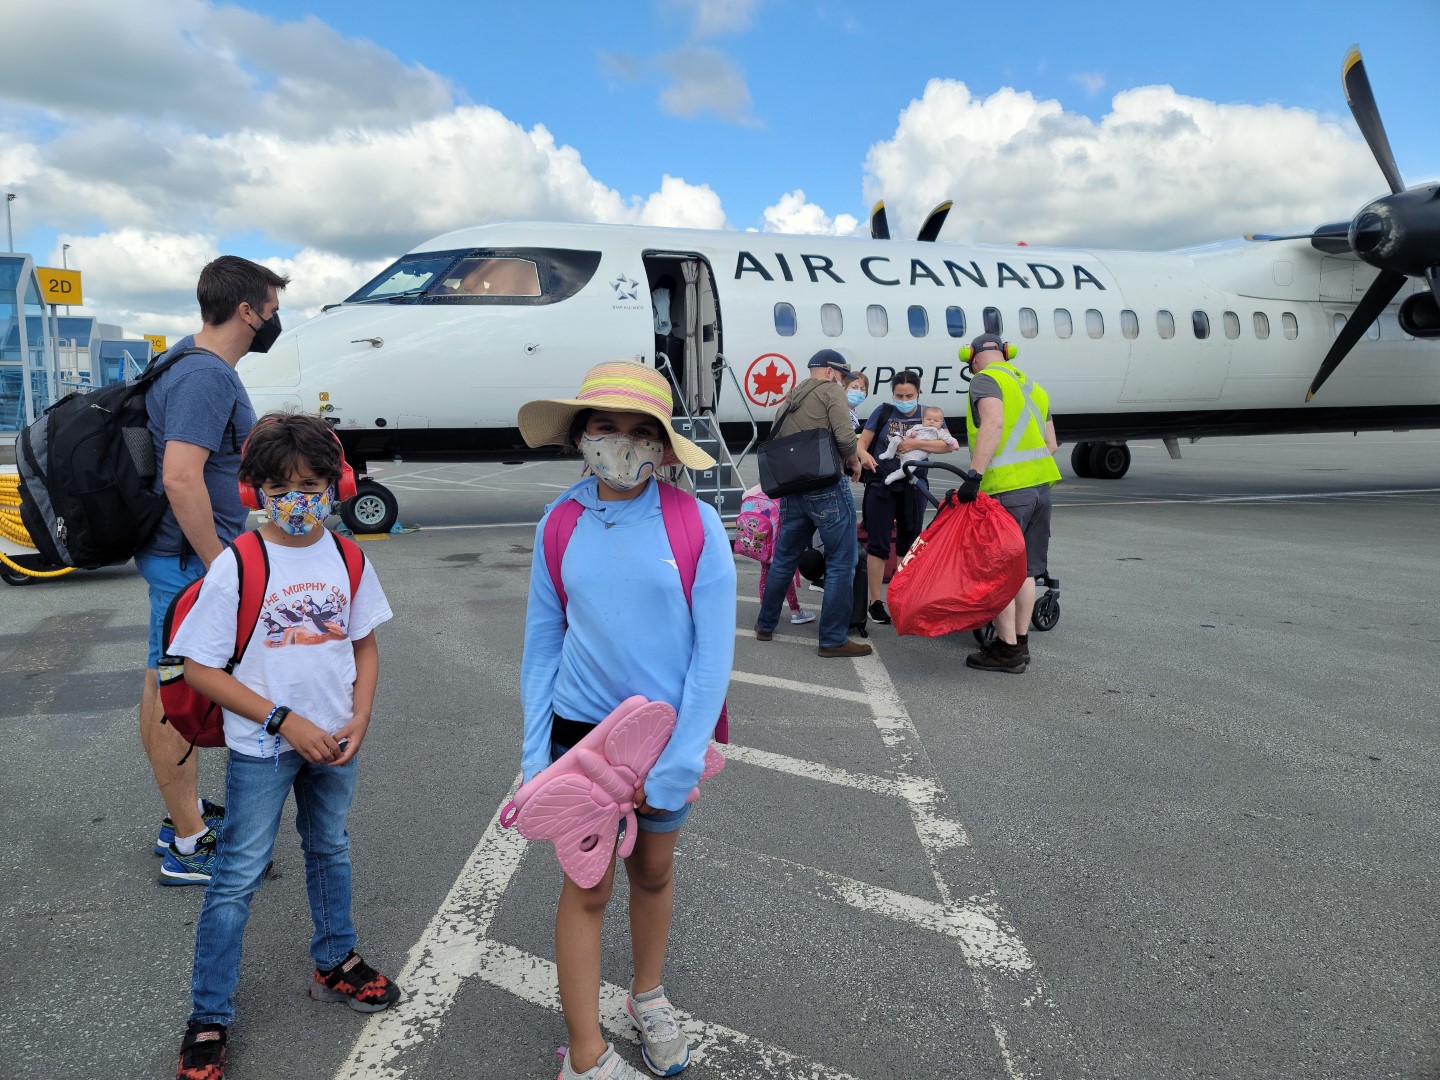 Family at Nova Scotia airport with air canada plane in background